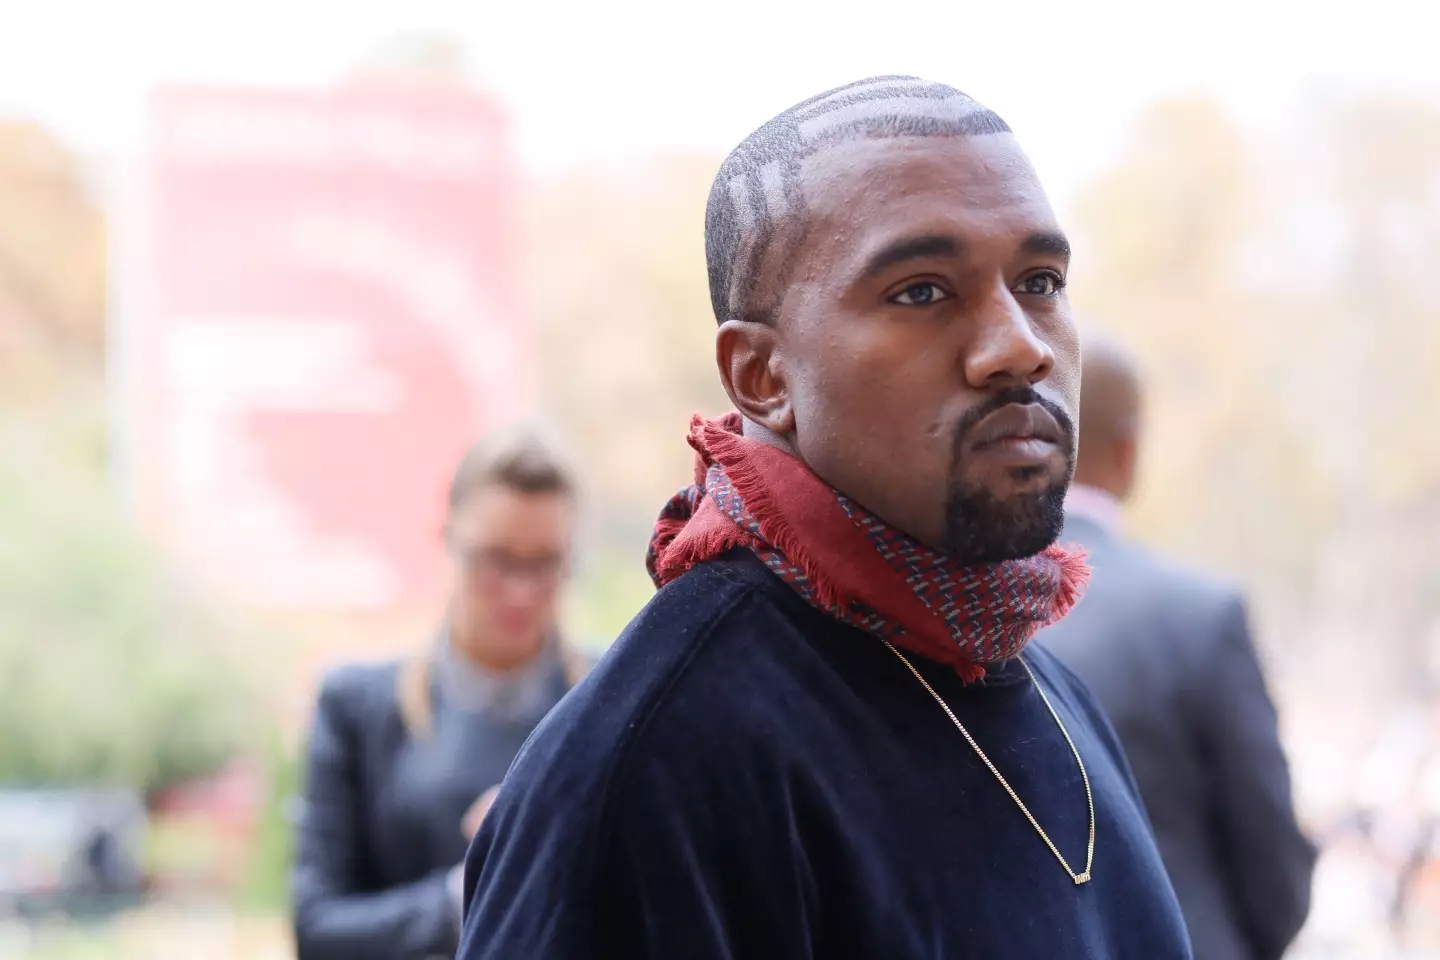 Kanye West has been slammed heavily for his extremely anti-semitic comments on social media.